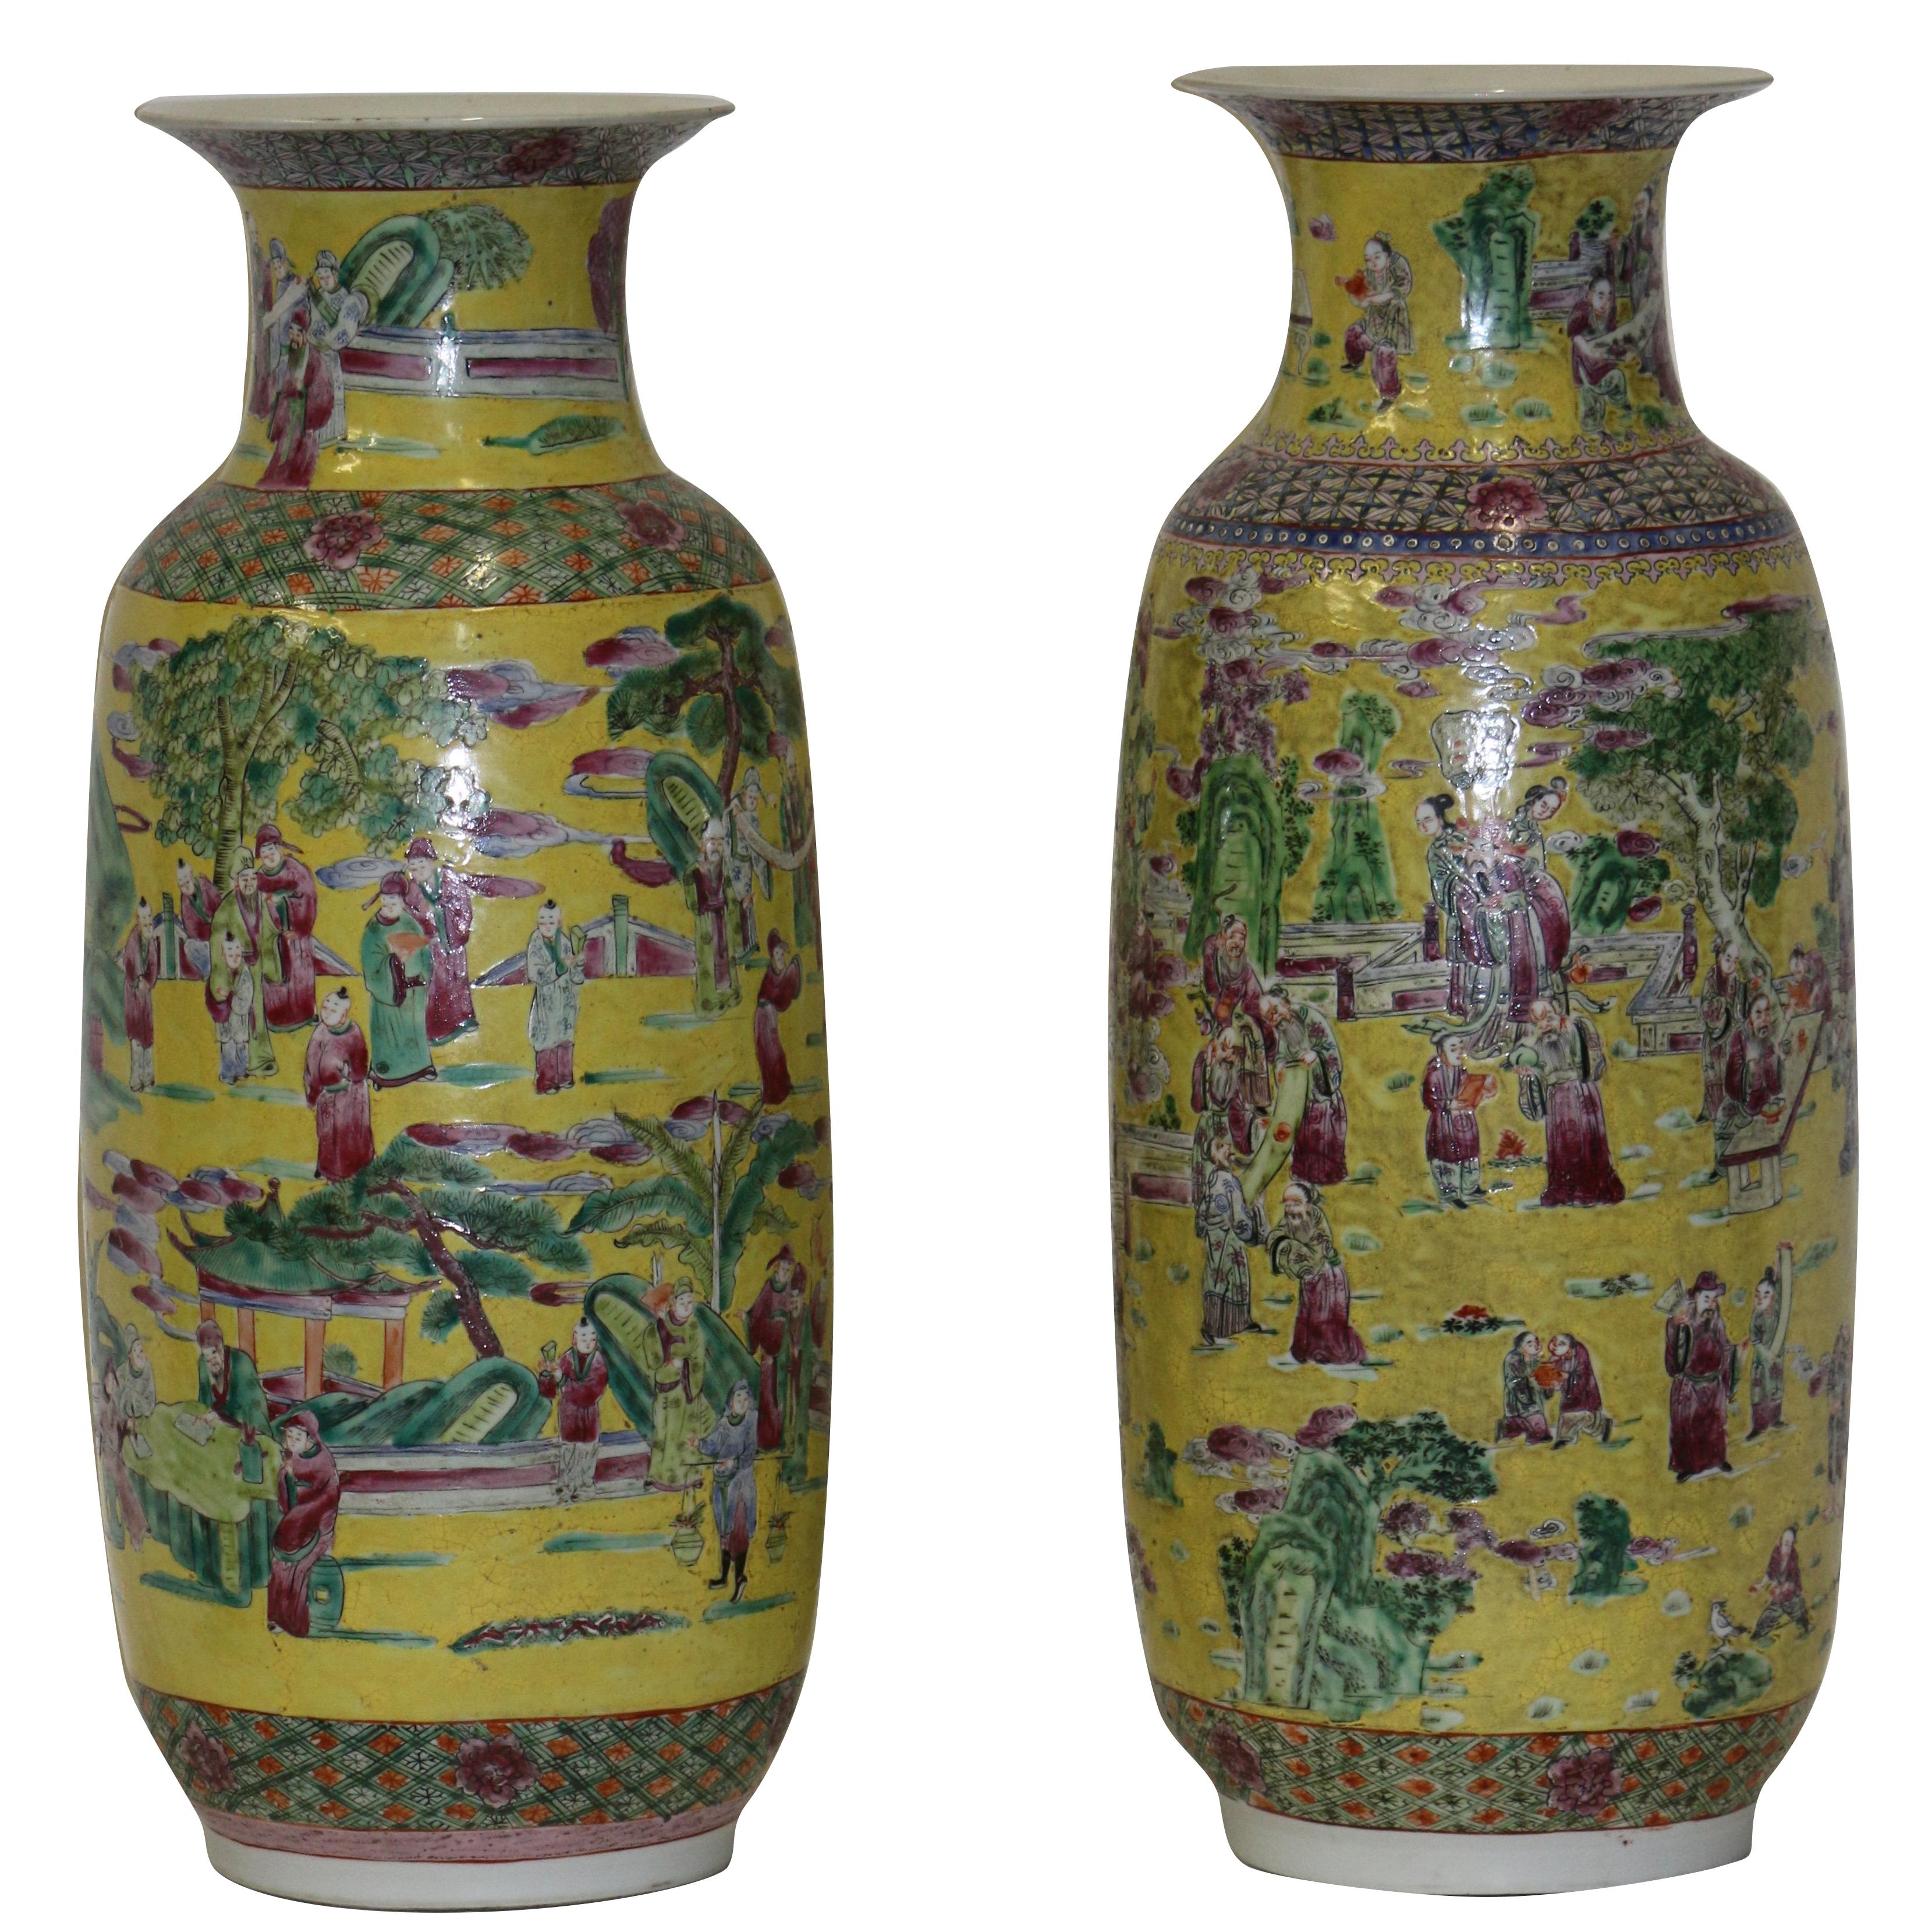 19th century rare fine complementary pair of Chinese imperial yellow porcelain palatial size vases with Hand Painted scenes measures: 1-23.5